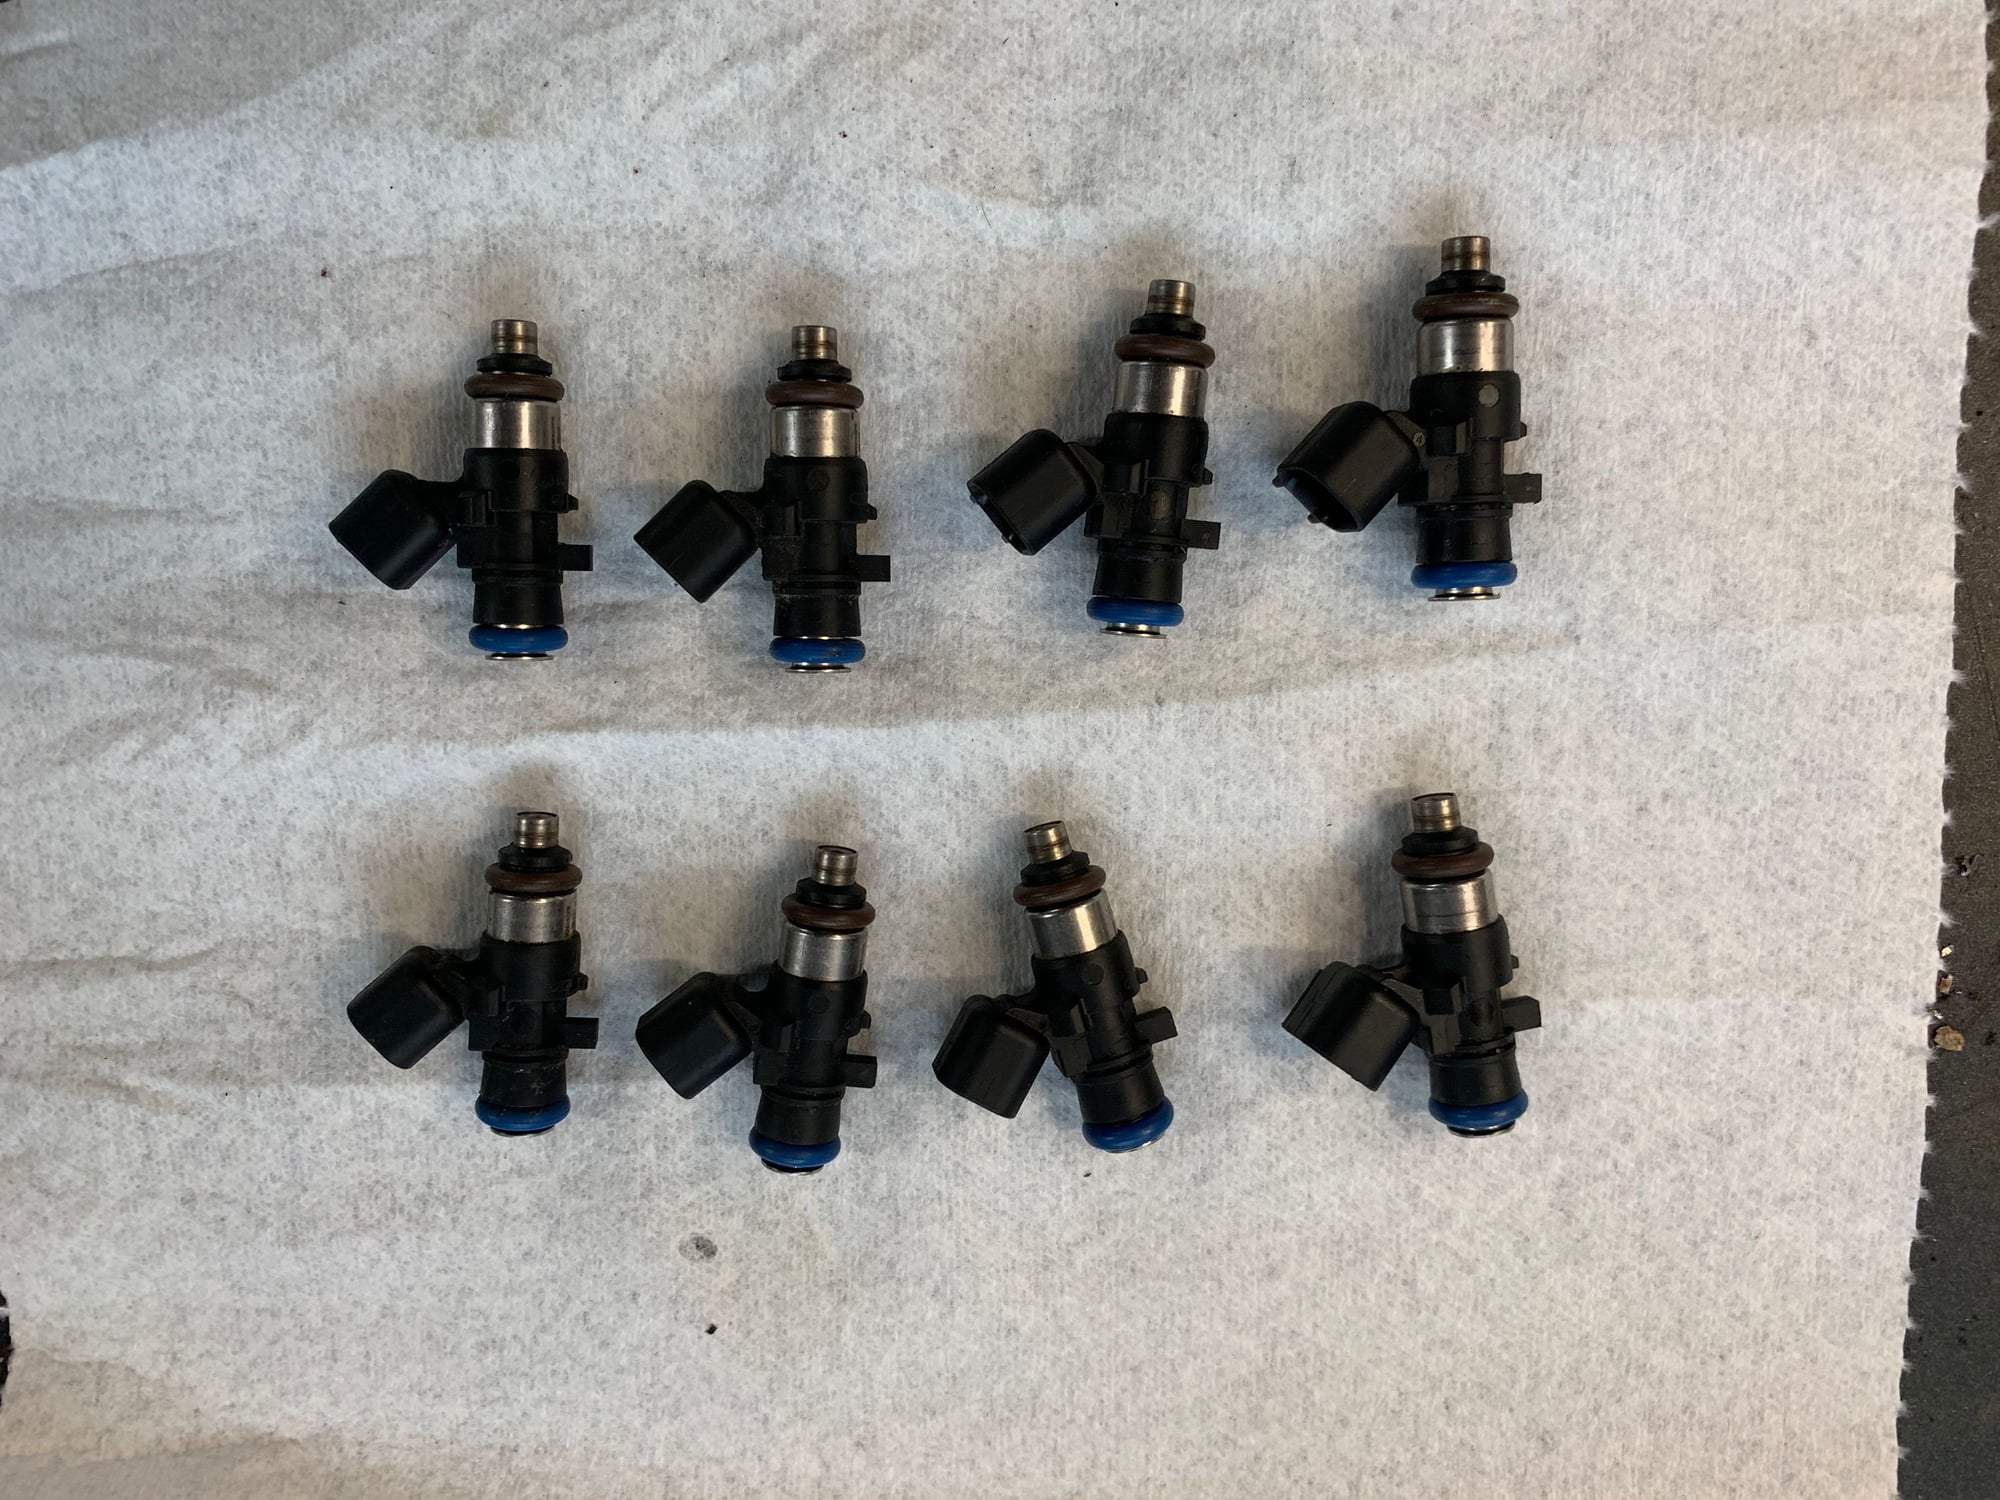  - 4th gen fbody squash fuel system , DW injectors - Schenectady, NY 12306, United States